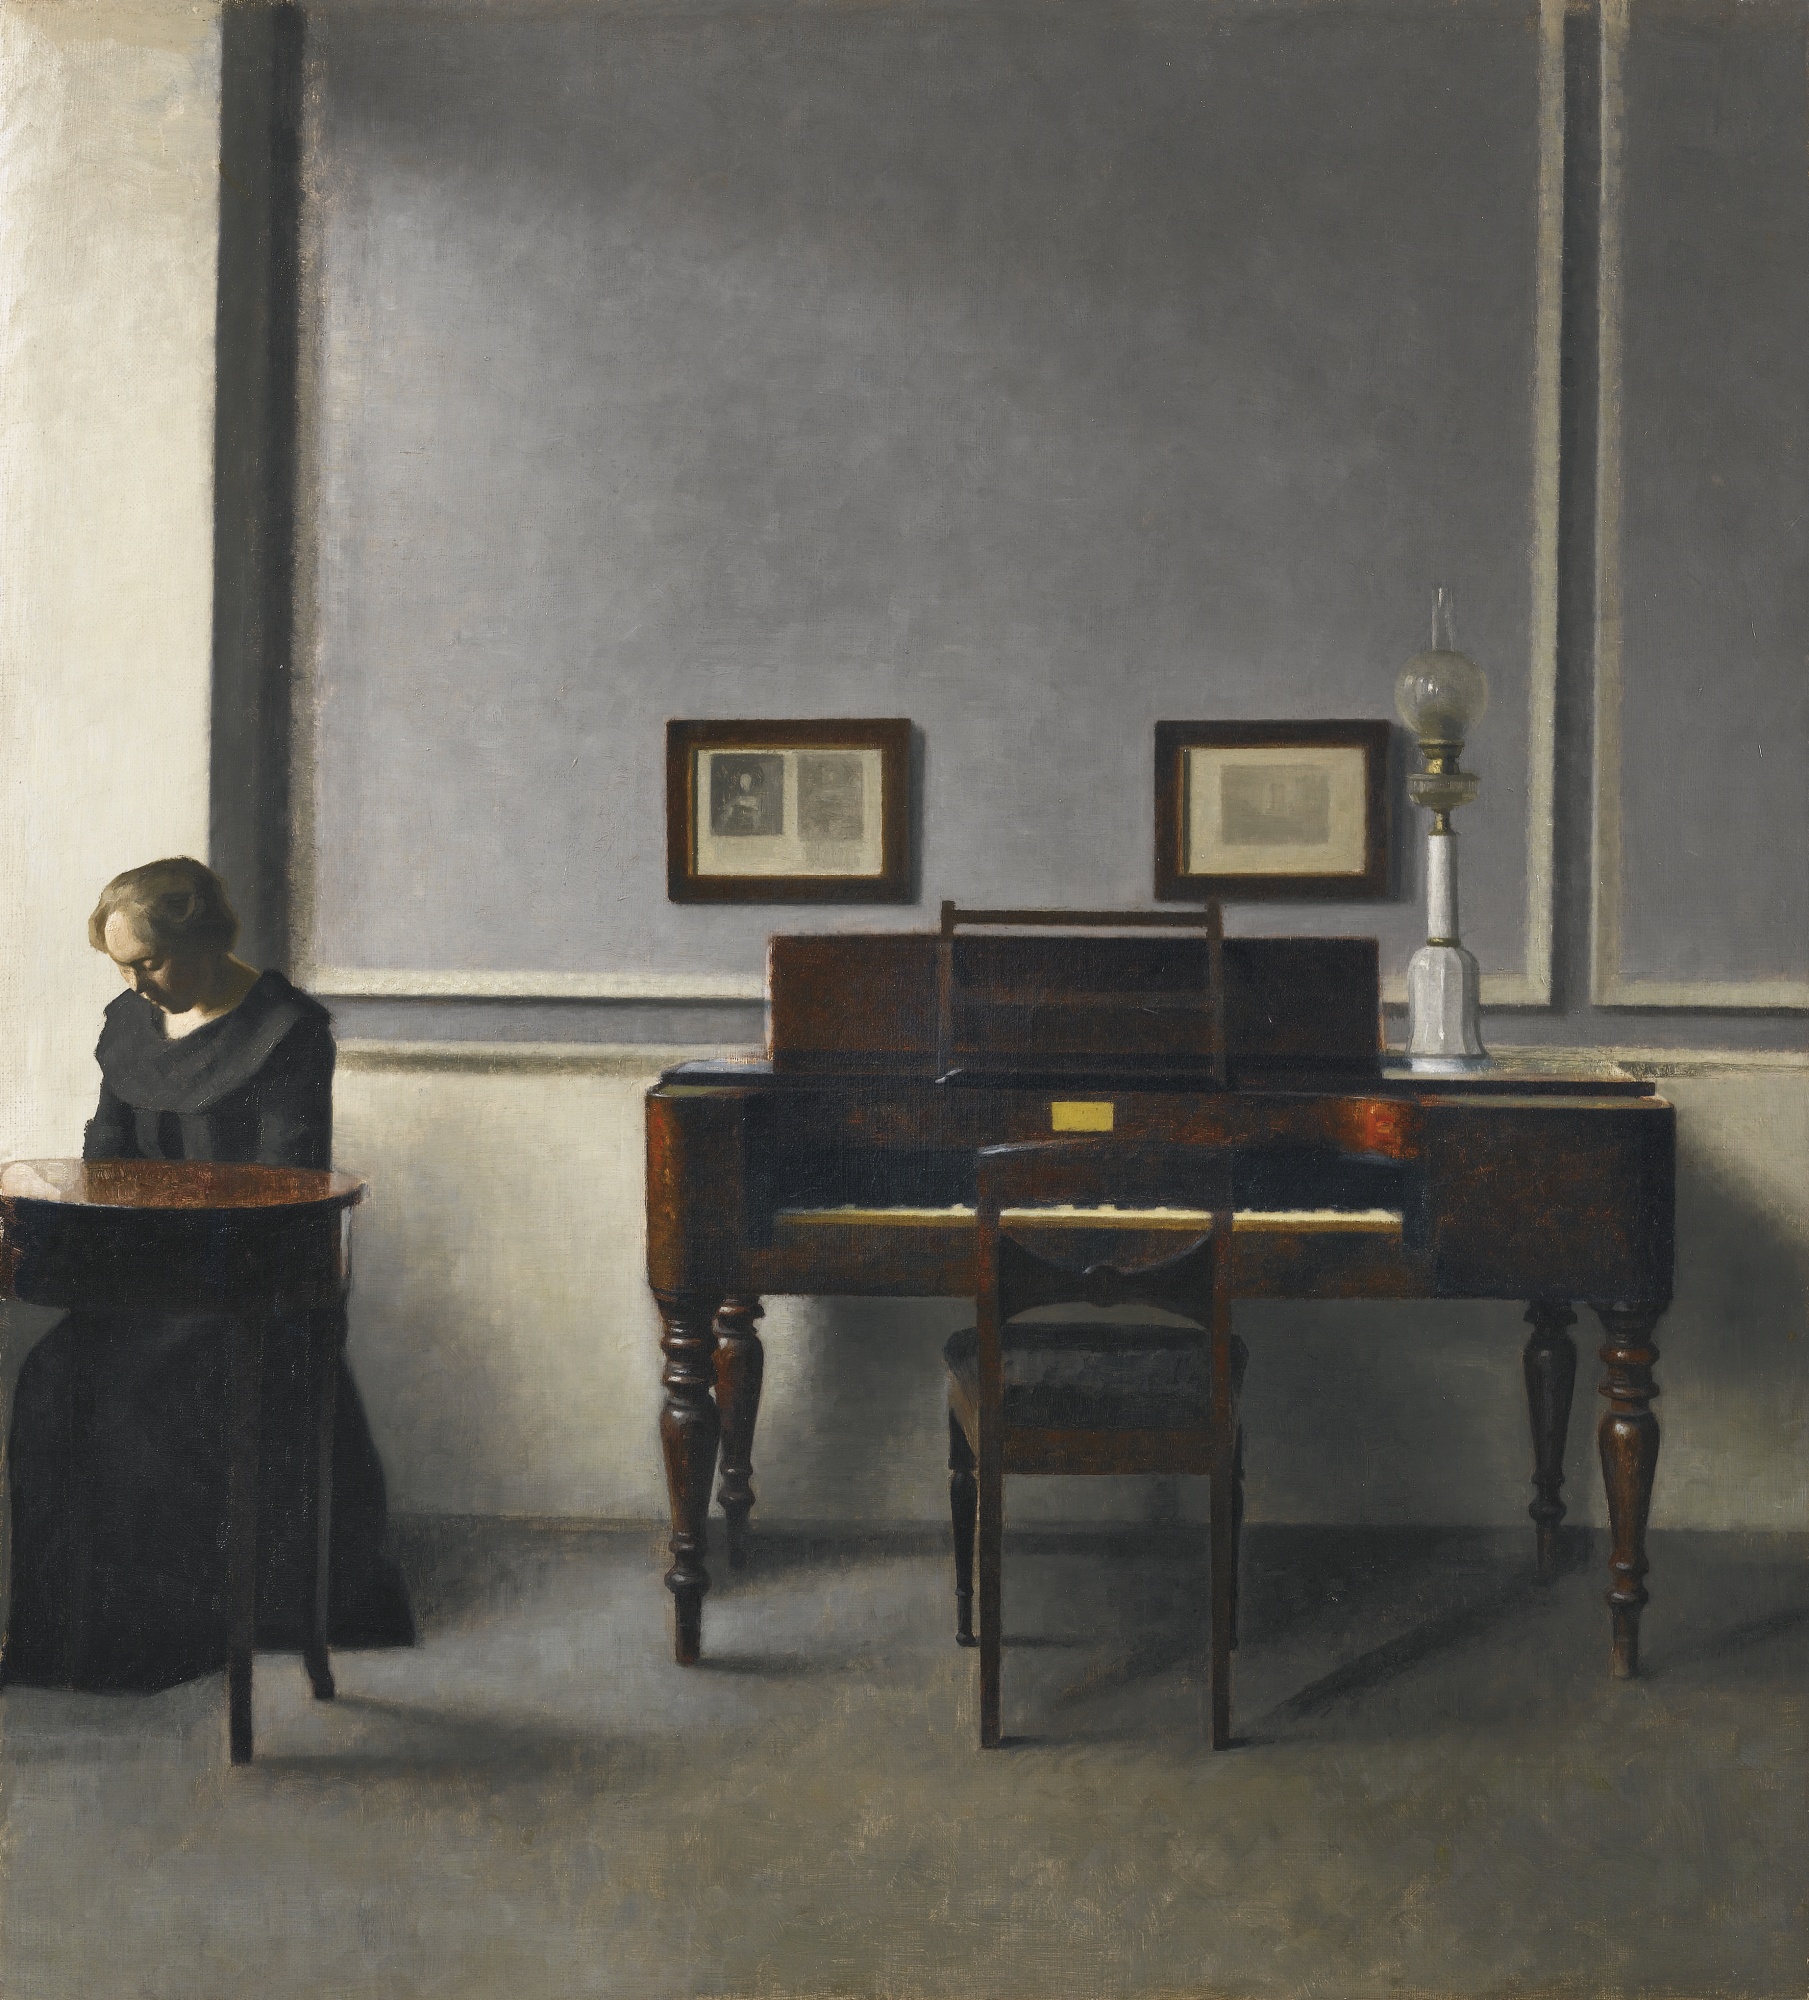 File:Vilhelm Hammershoi, Ida in an Interior with Piano, 1901.jpg -  Wikimedia Commons